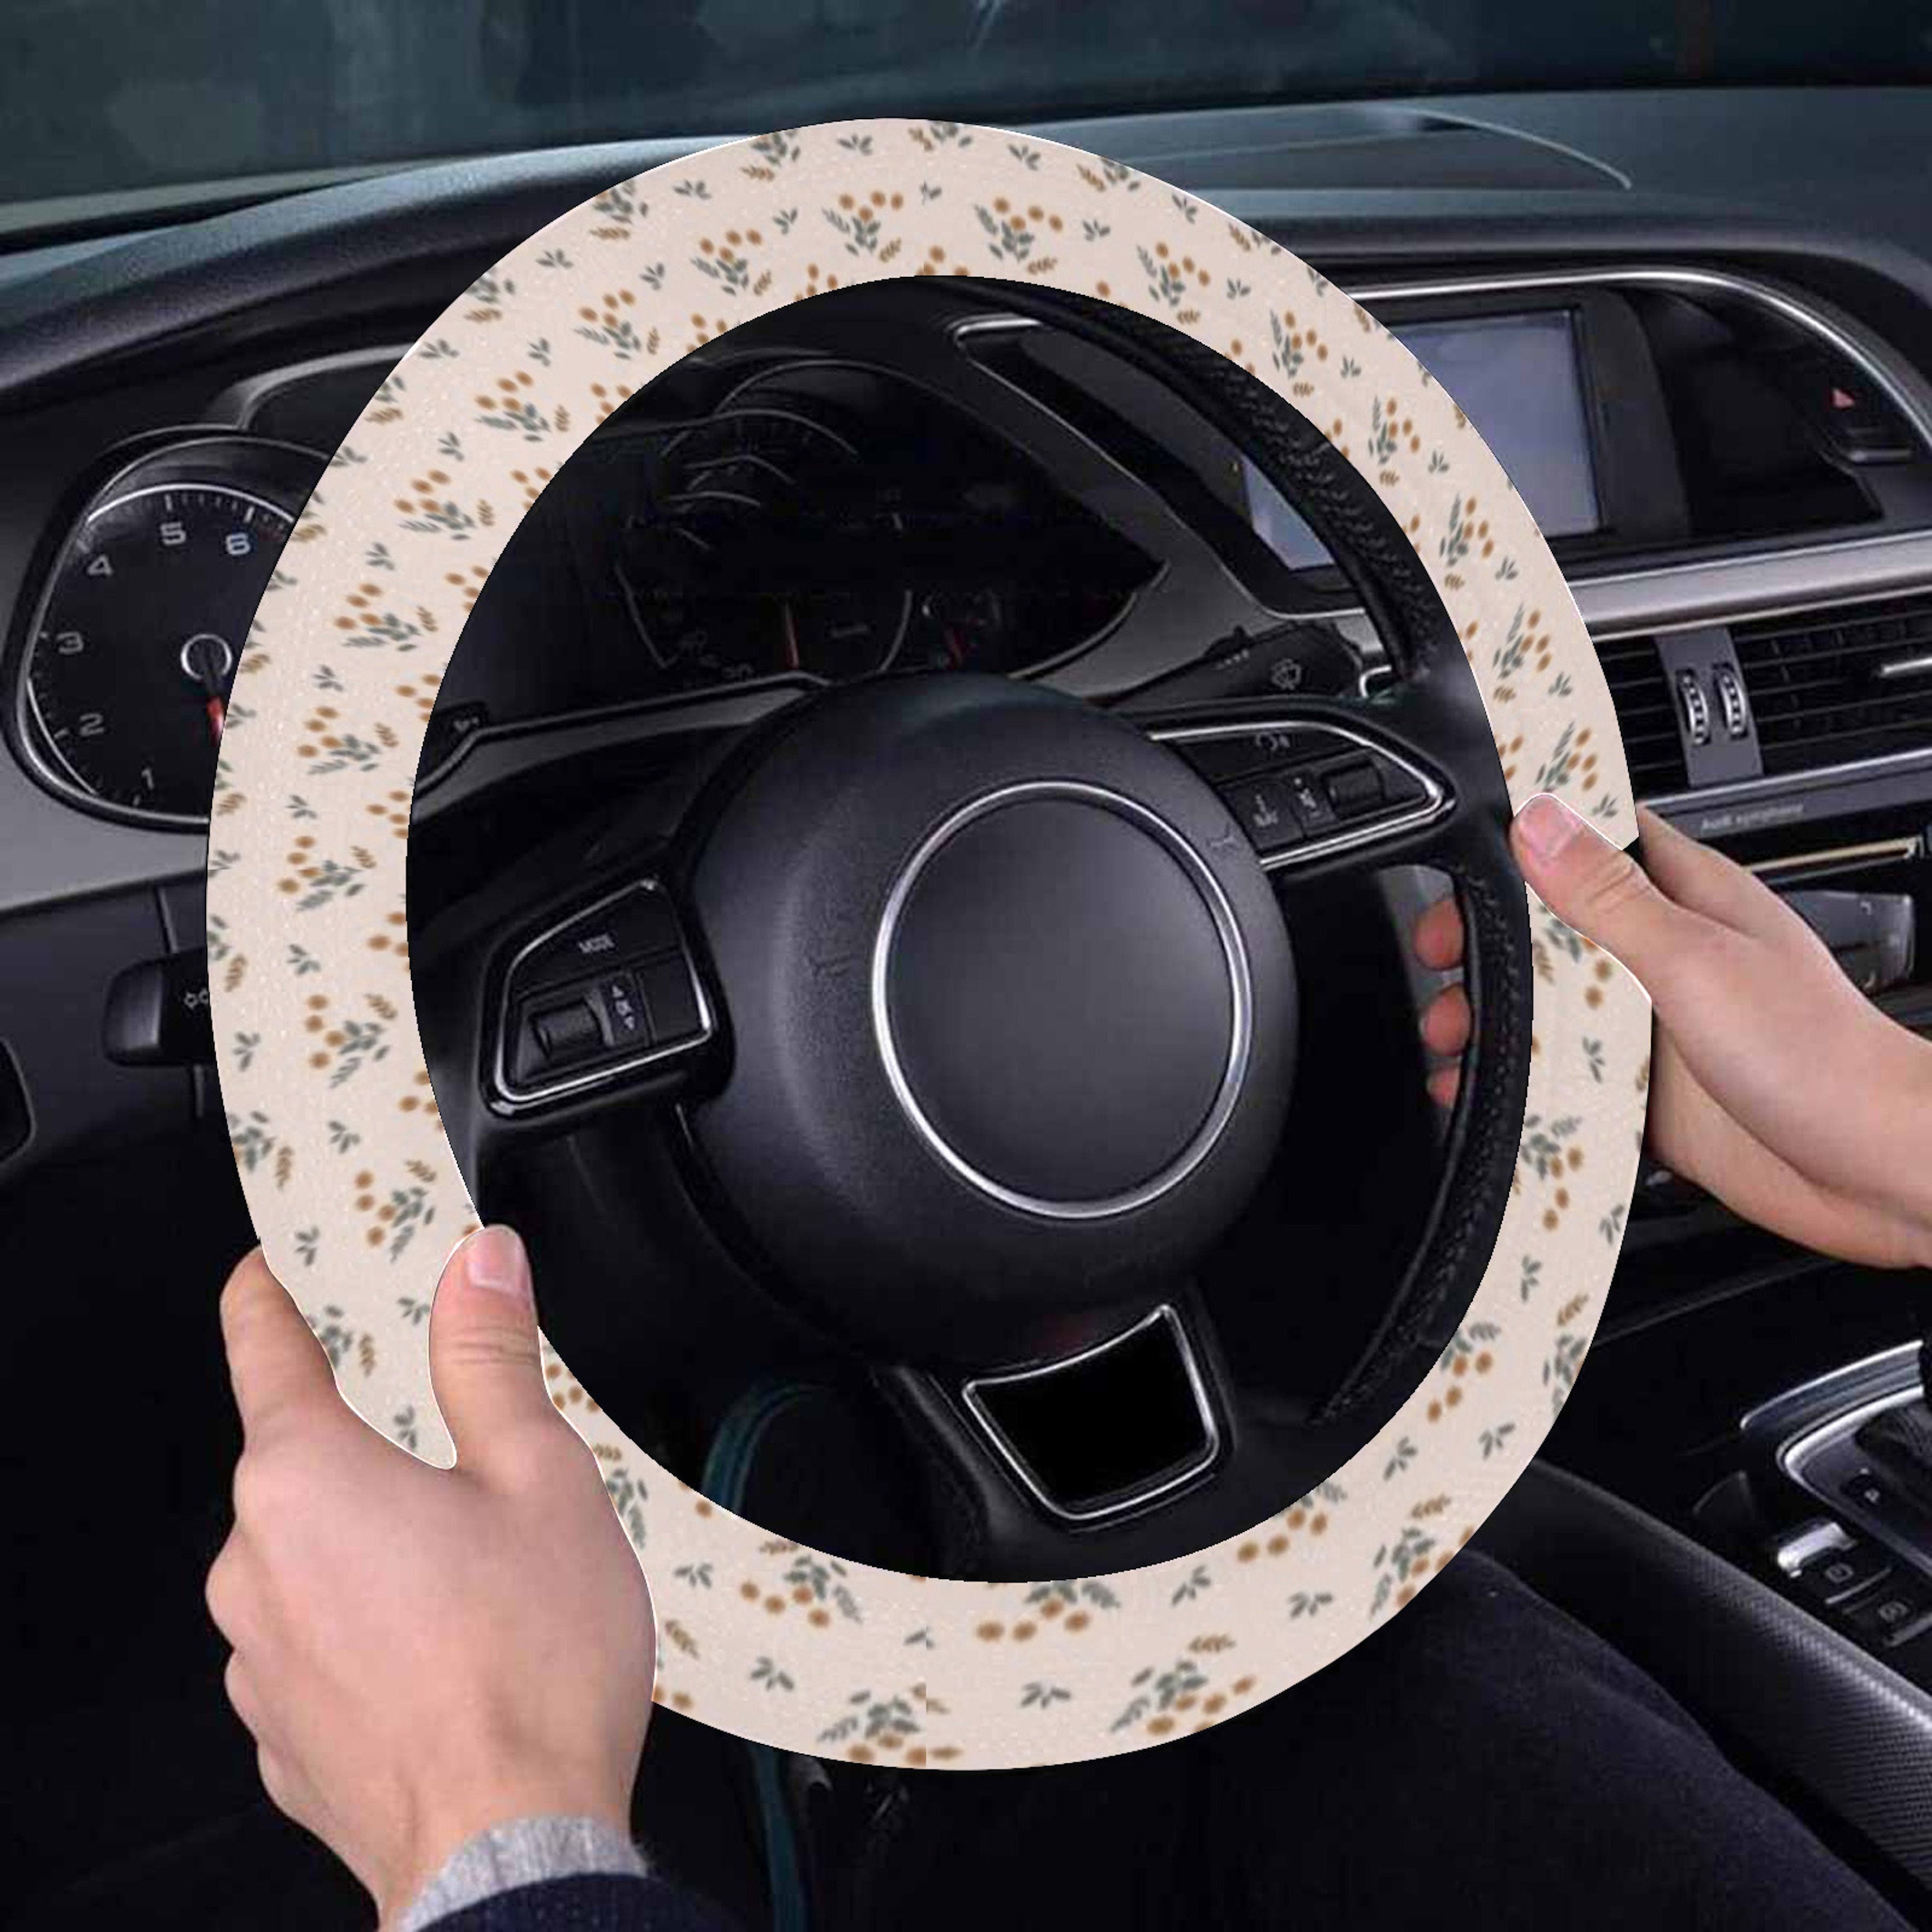  Coldinair Daisy Print Floral Car Steering Wheel Cover for  Women,Anti-Slip and Sweat Absorption,Universal 15 inch : Automotive